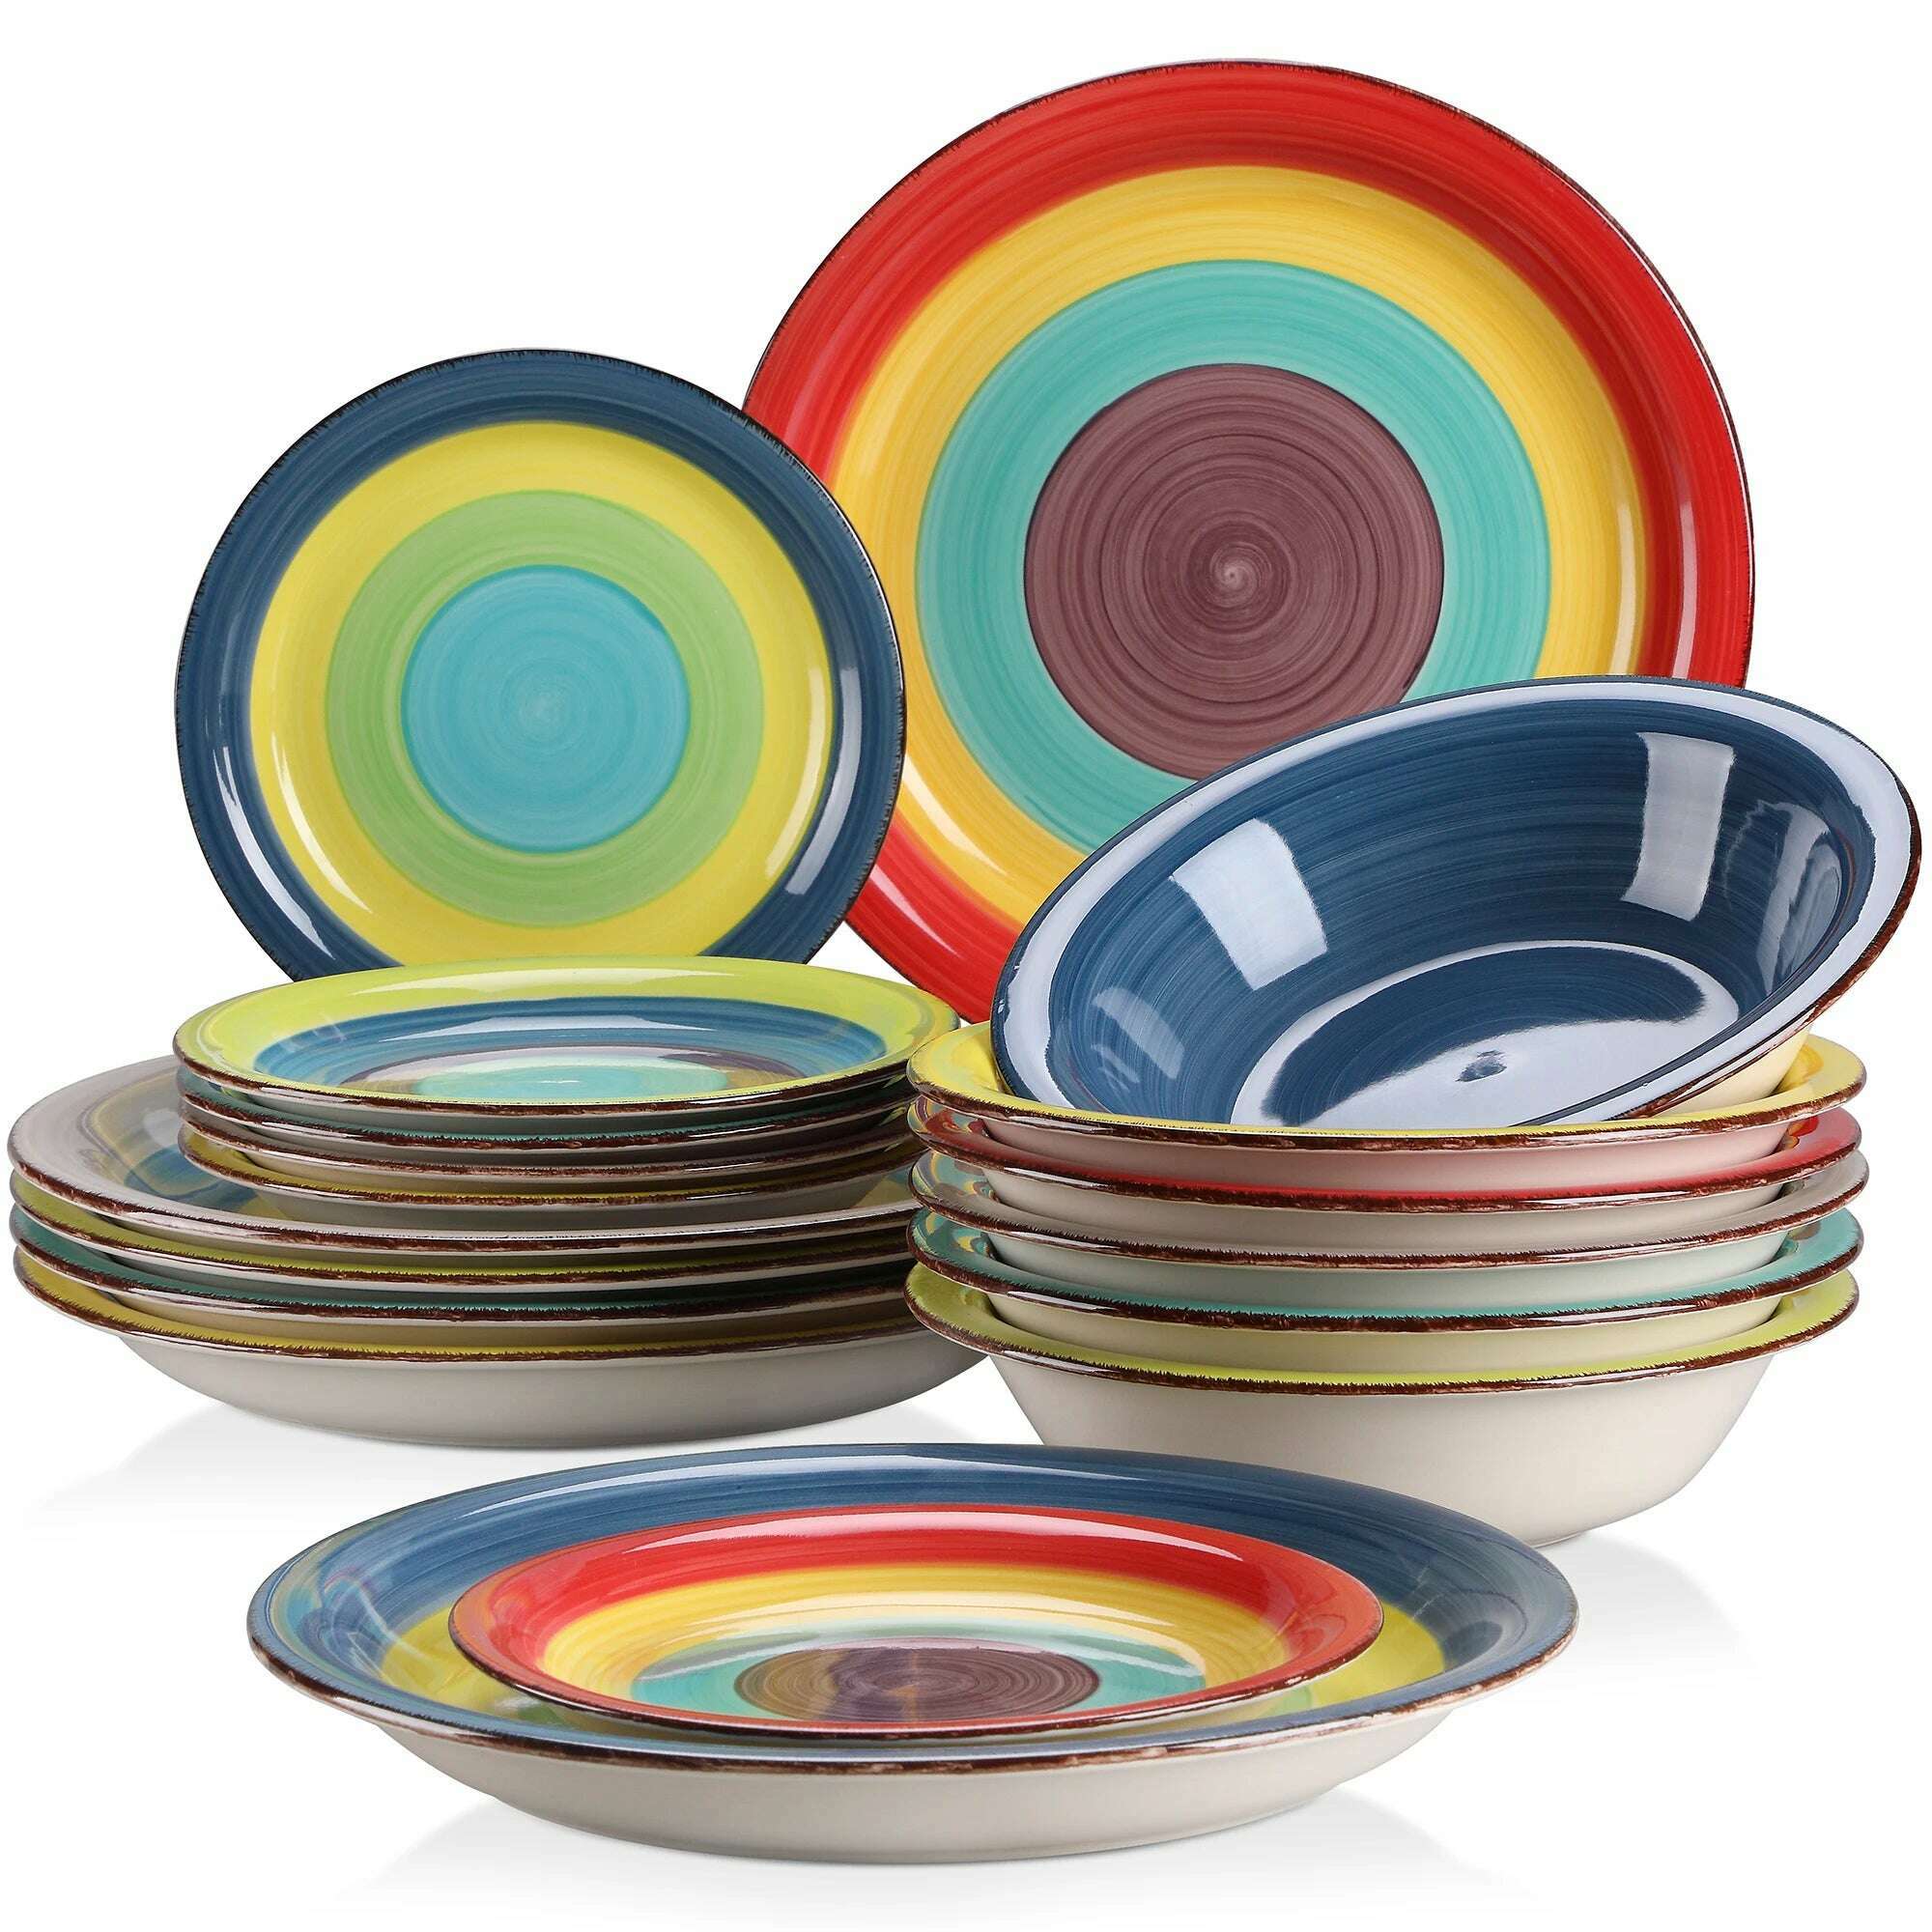 KIMLUD, New Vancasso Arco 18-Piece Ceramic Tableware Set Handpainted Spiral and Alternately Colourful Pattern Stoneware Dinner Set for 6, 18-Piece / United Kingdom, KIMLUD Womens Clothes